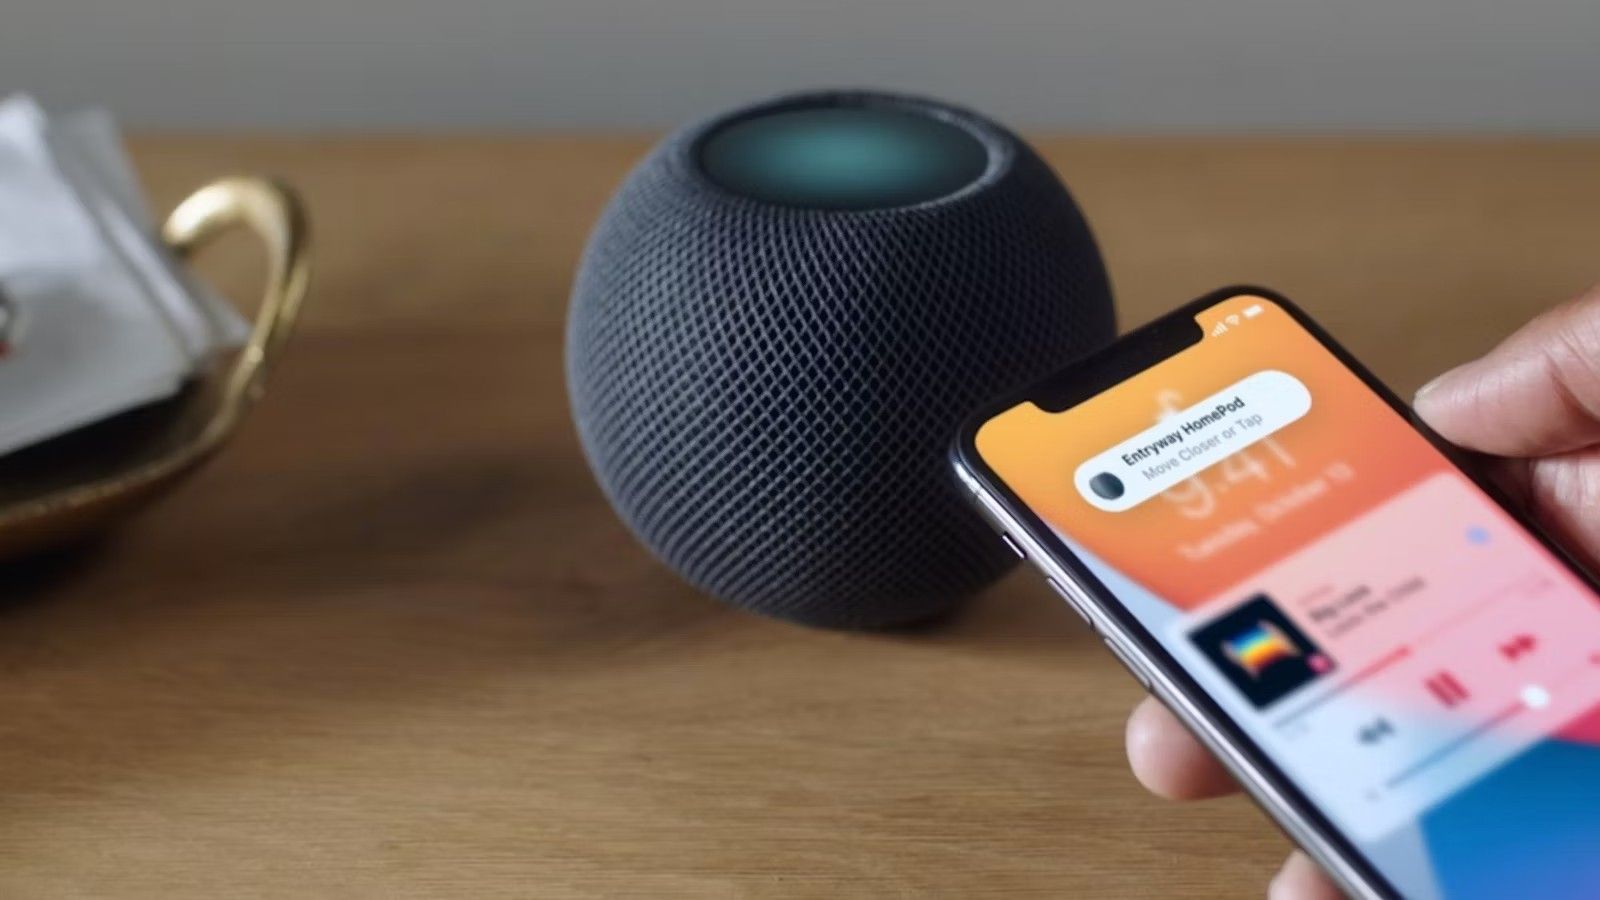 Is my smart speaker spying on me? It’s time for a privacy check